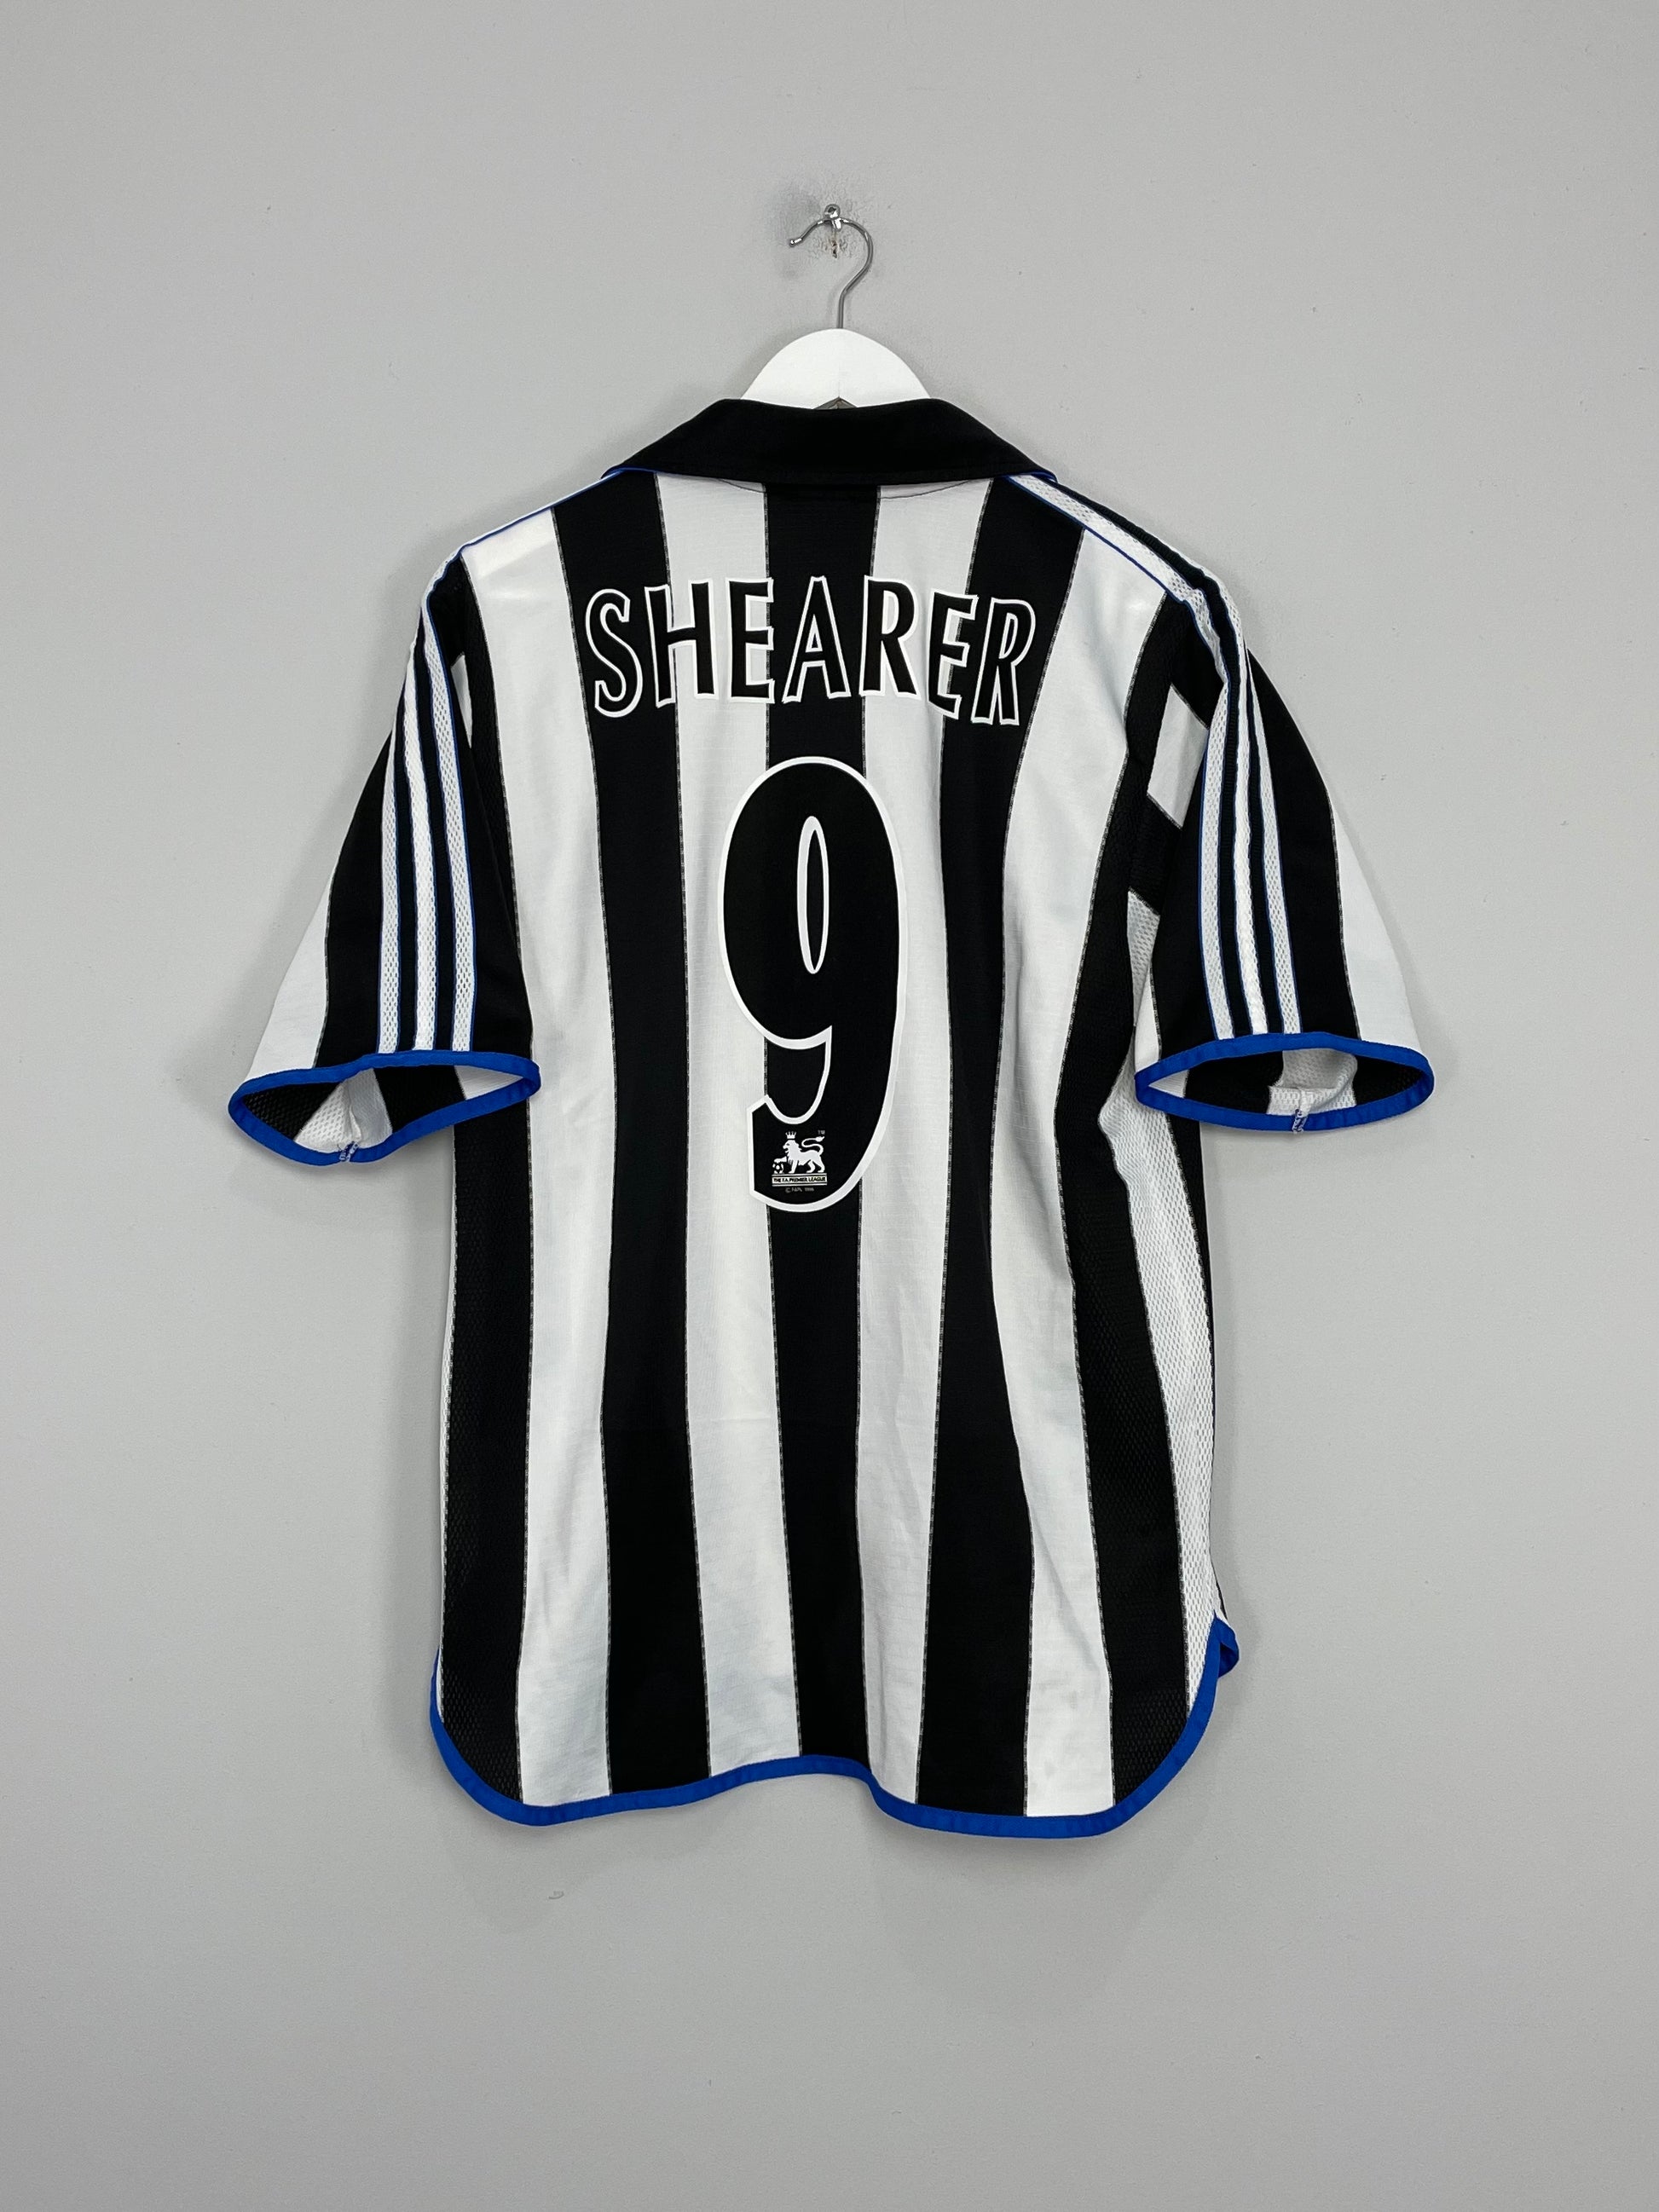 Image of the Newcastle Shearer shirt from the 1999/00 season